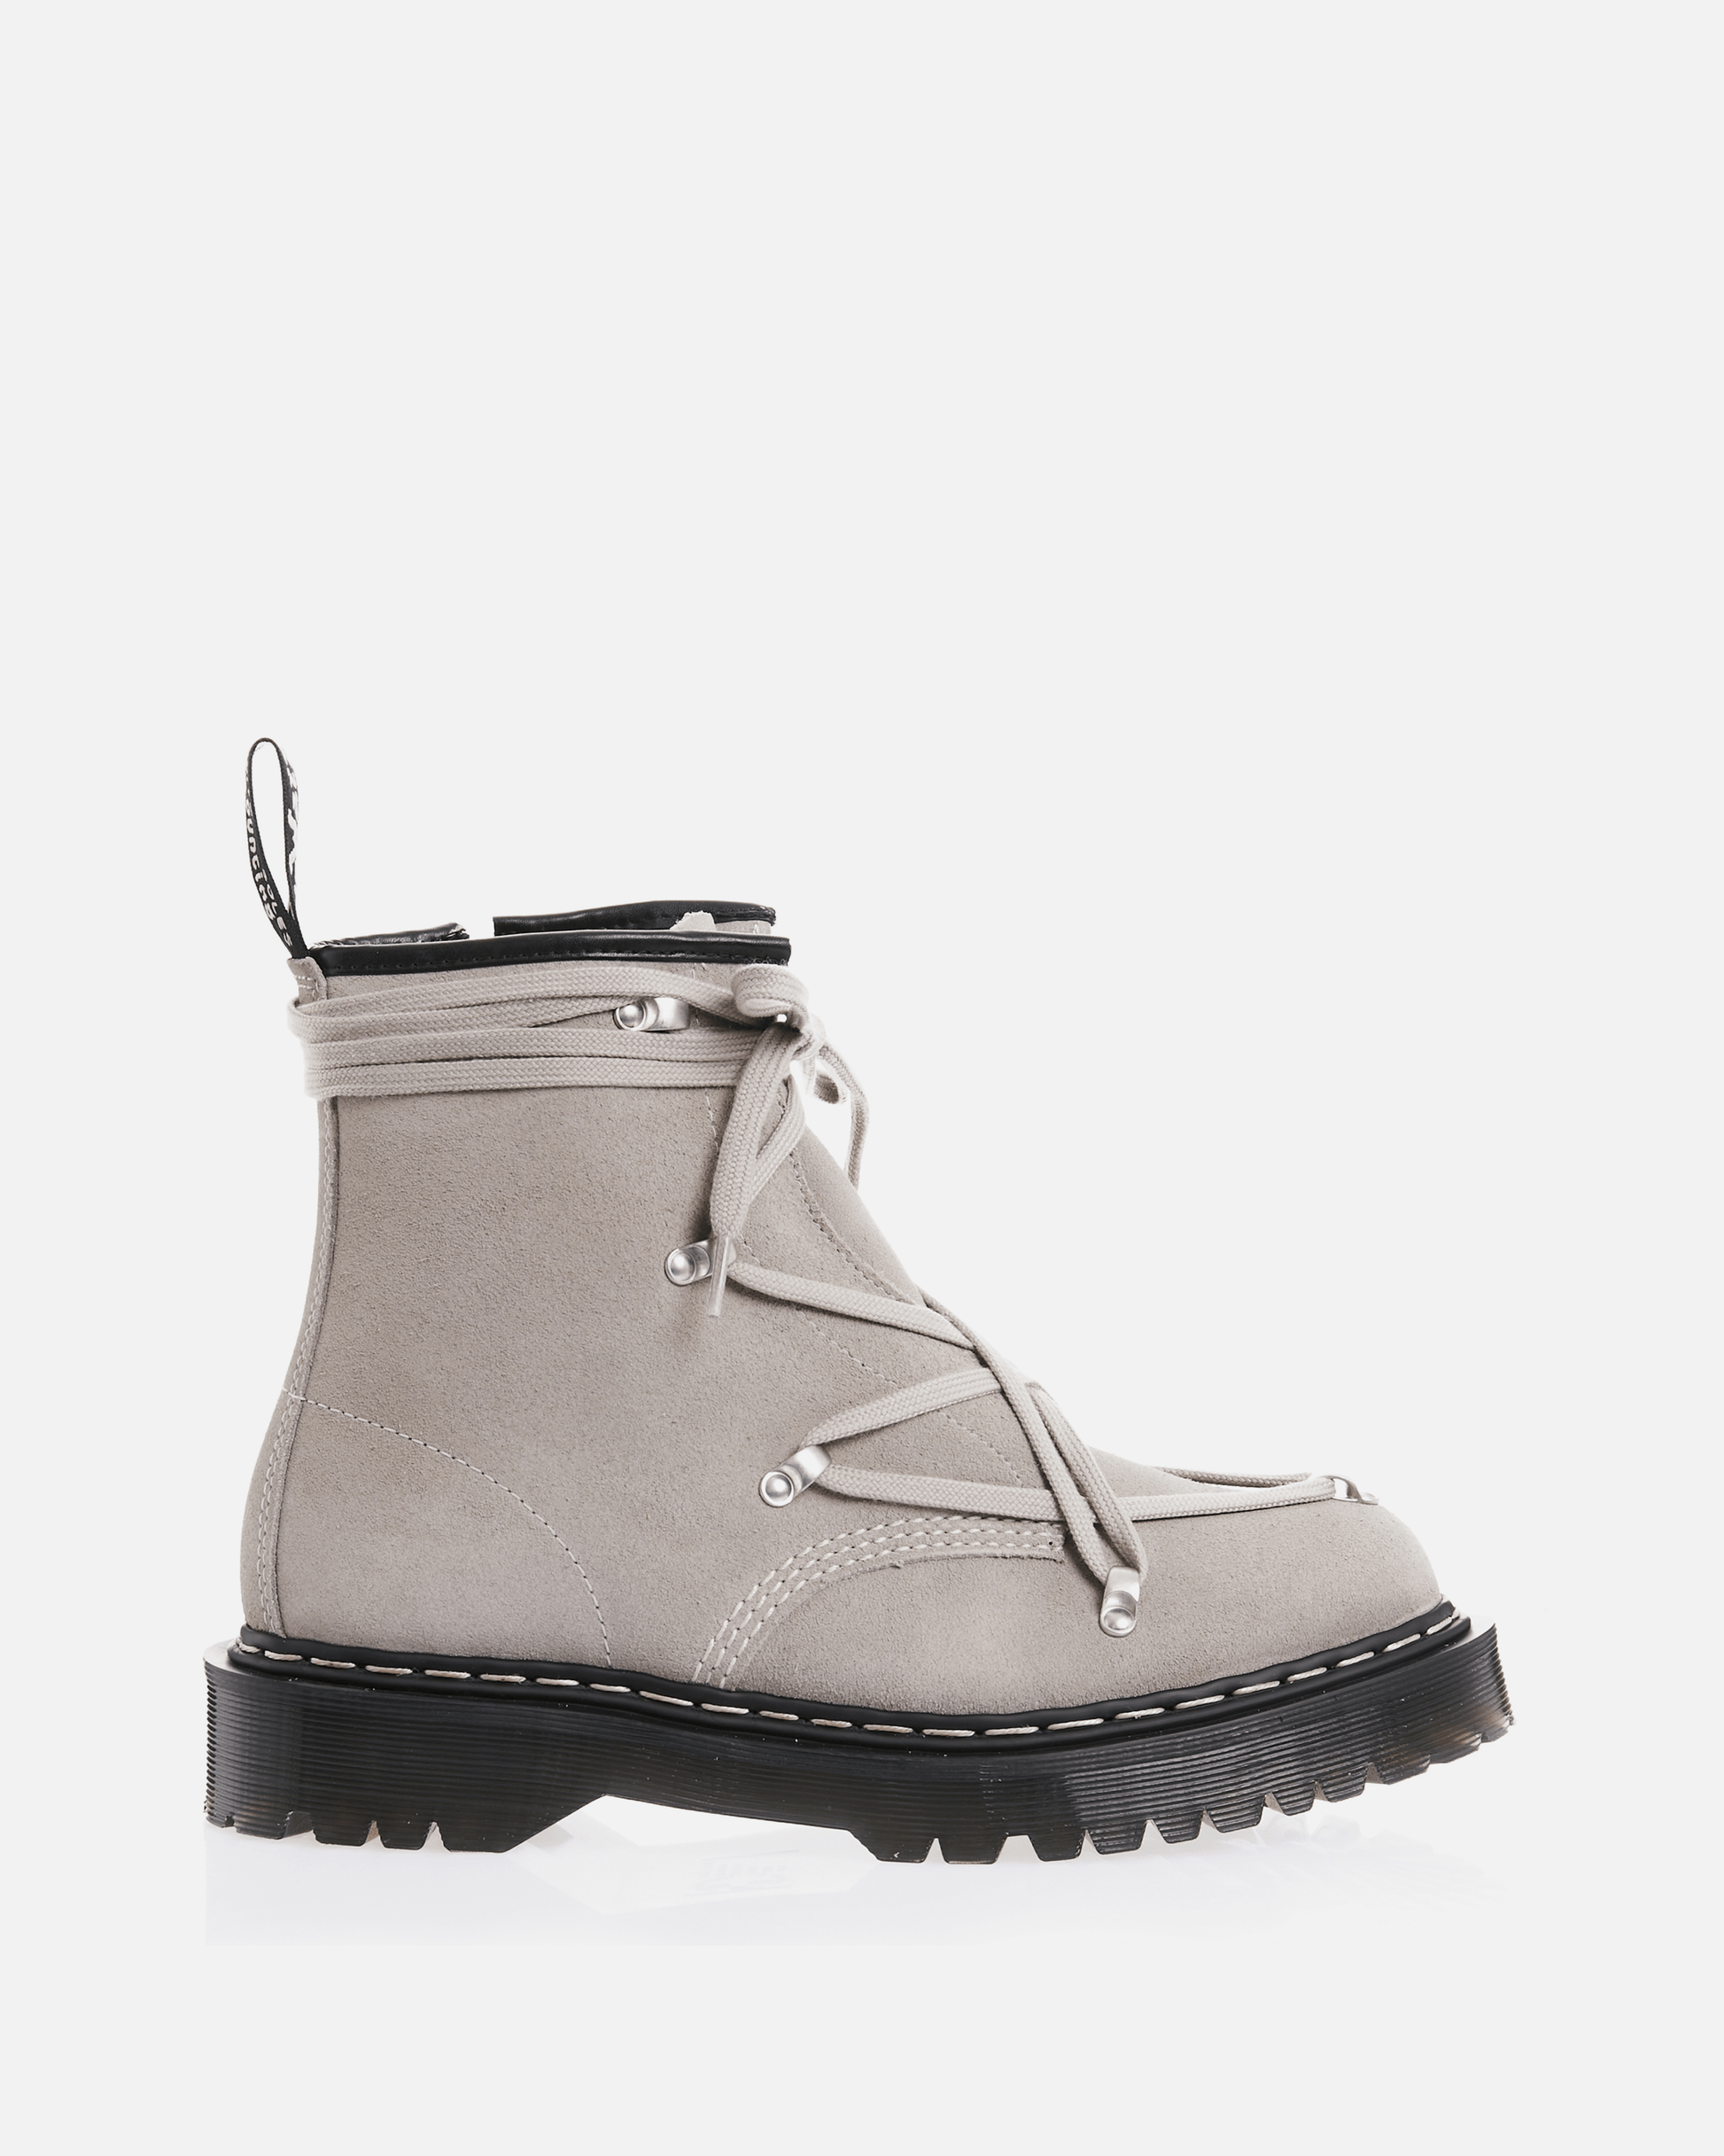 Rick Owens Releases Dr. Martens Bex Sole Boots in Pearl